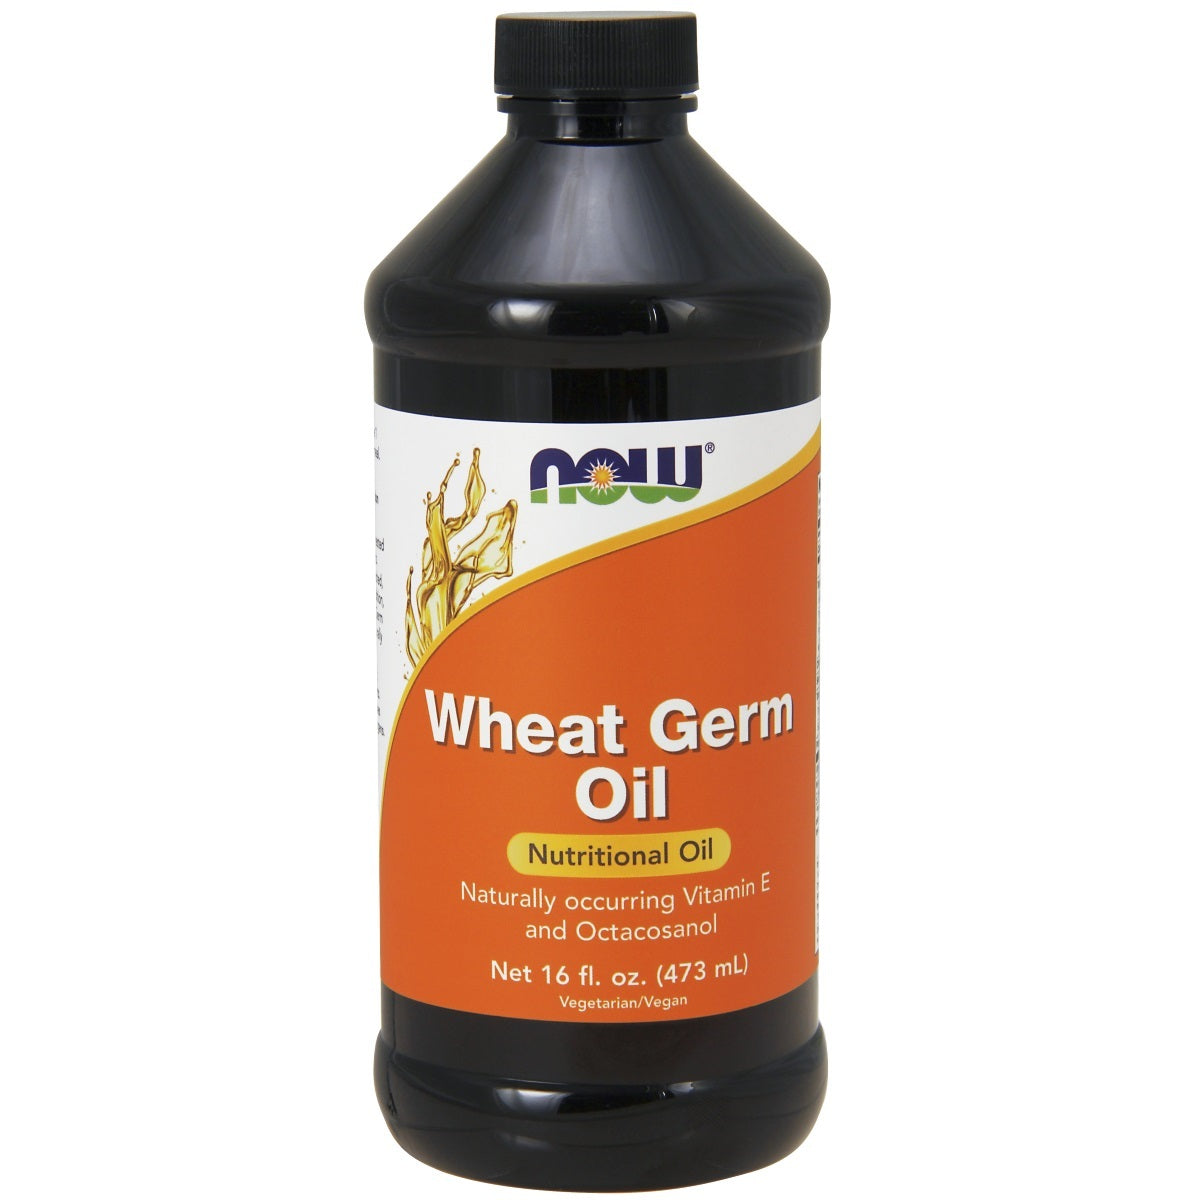 Primary image of Wheat Germ Oil